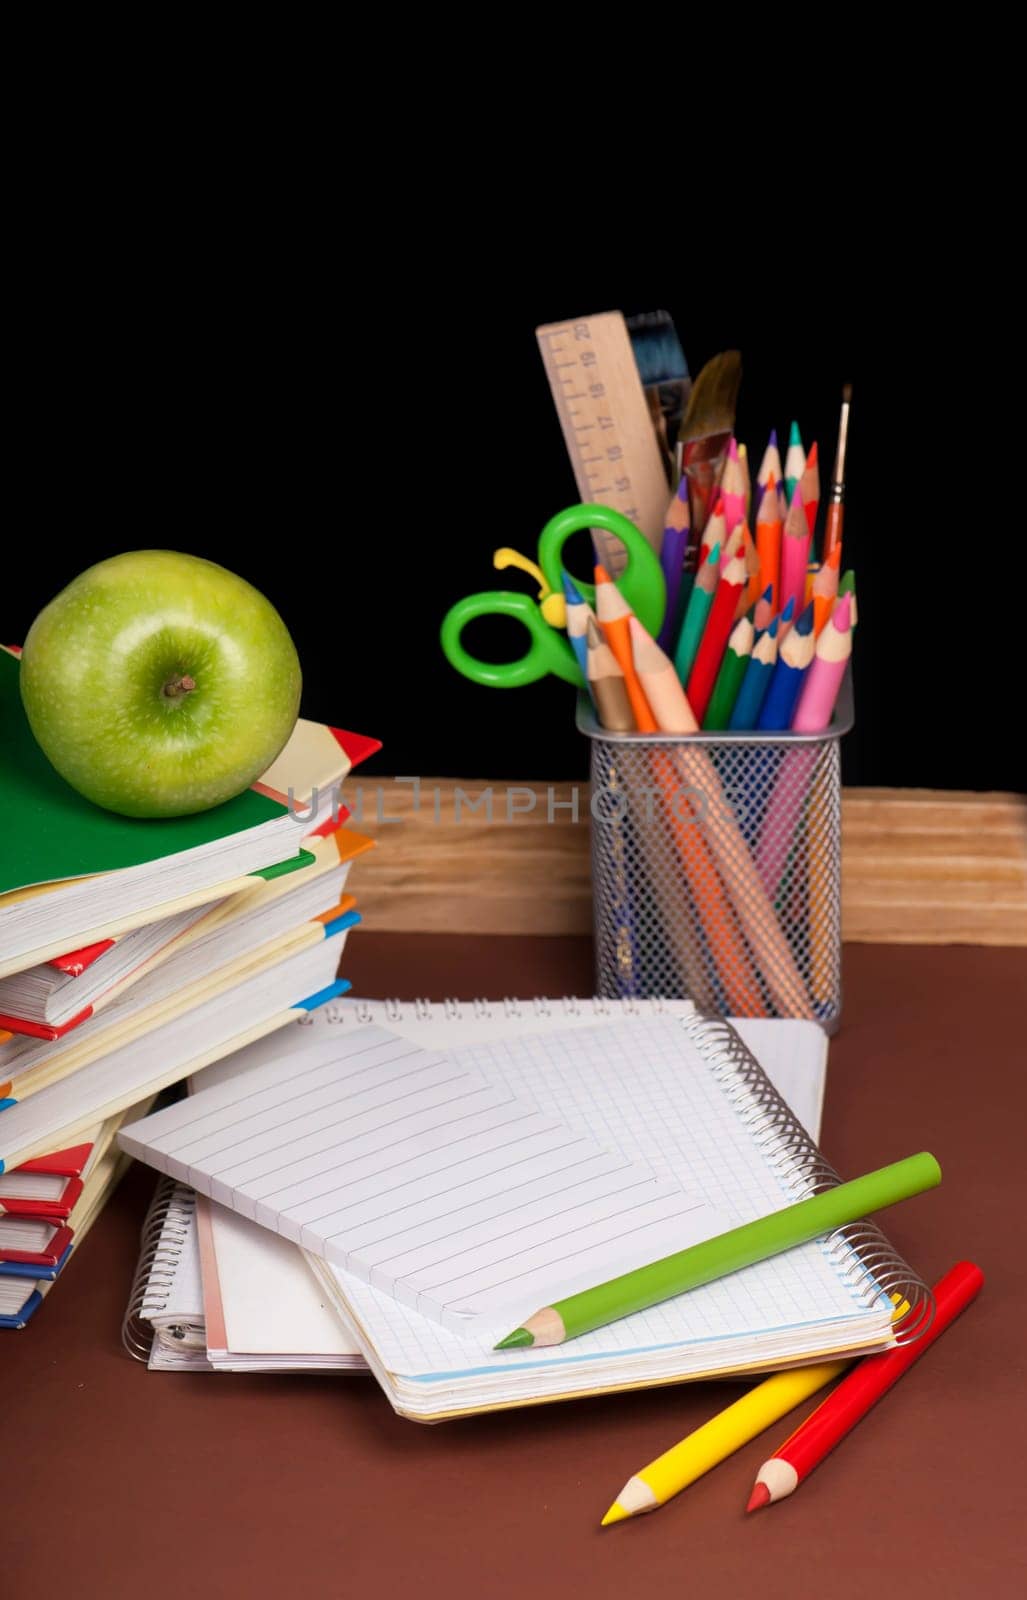 board, books, pencils, opened empty notebook against a dark background. by aprilphoto